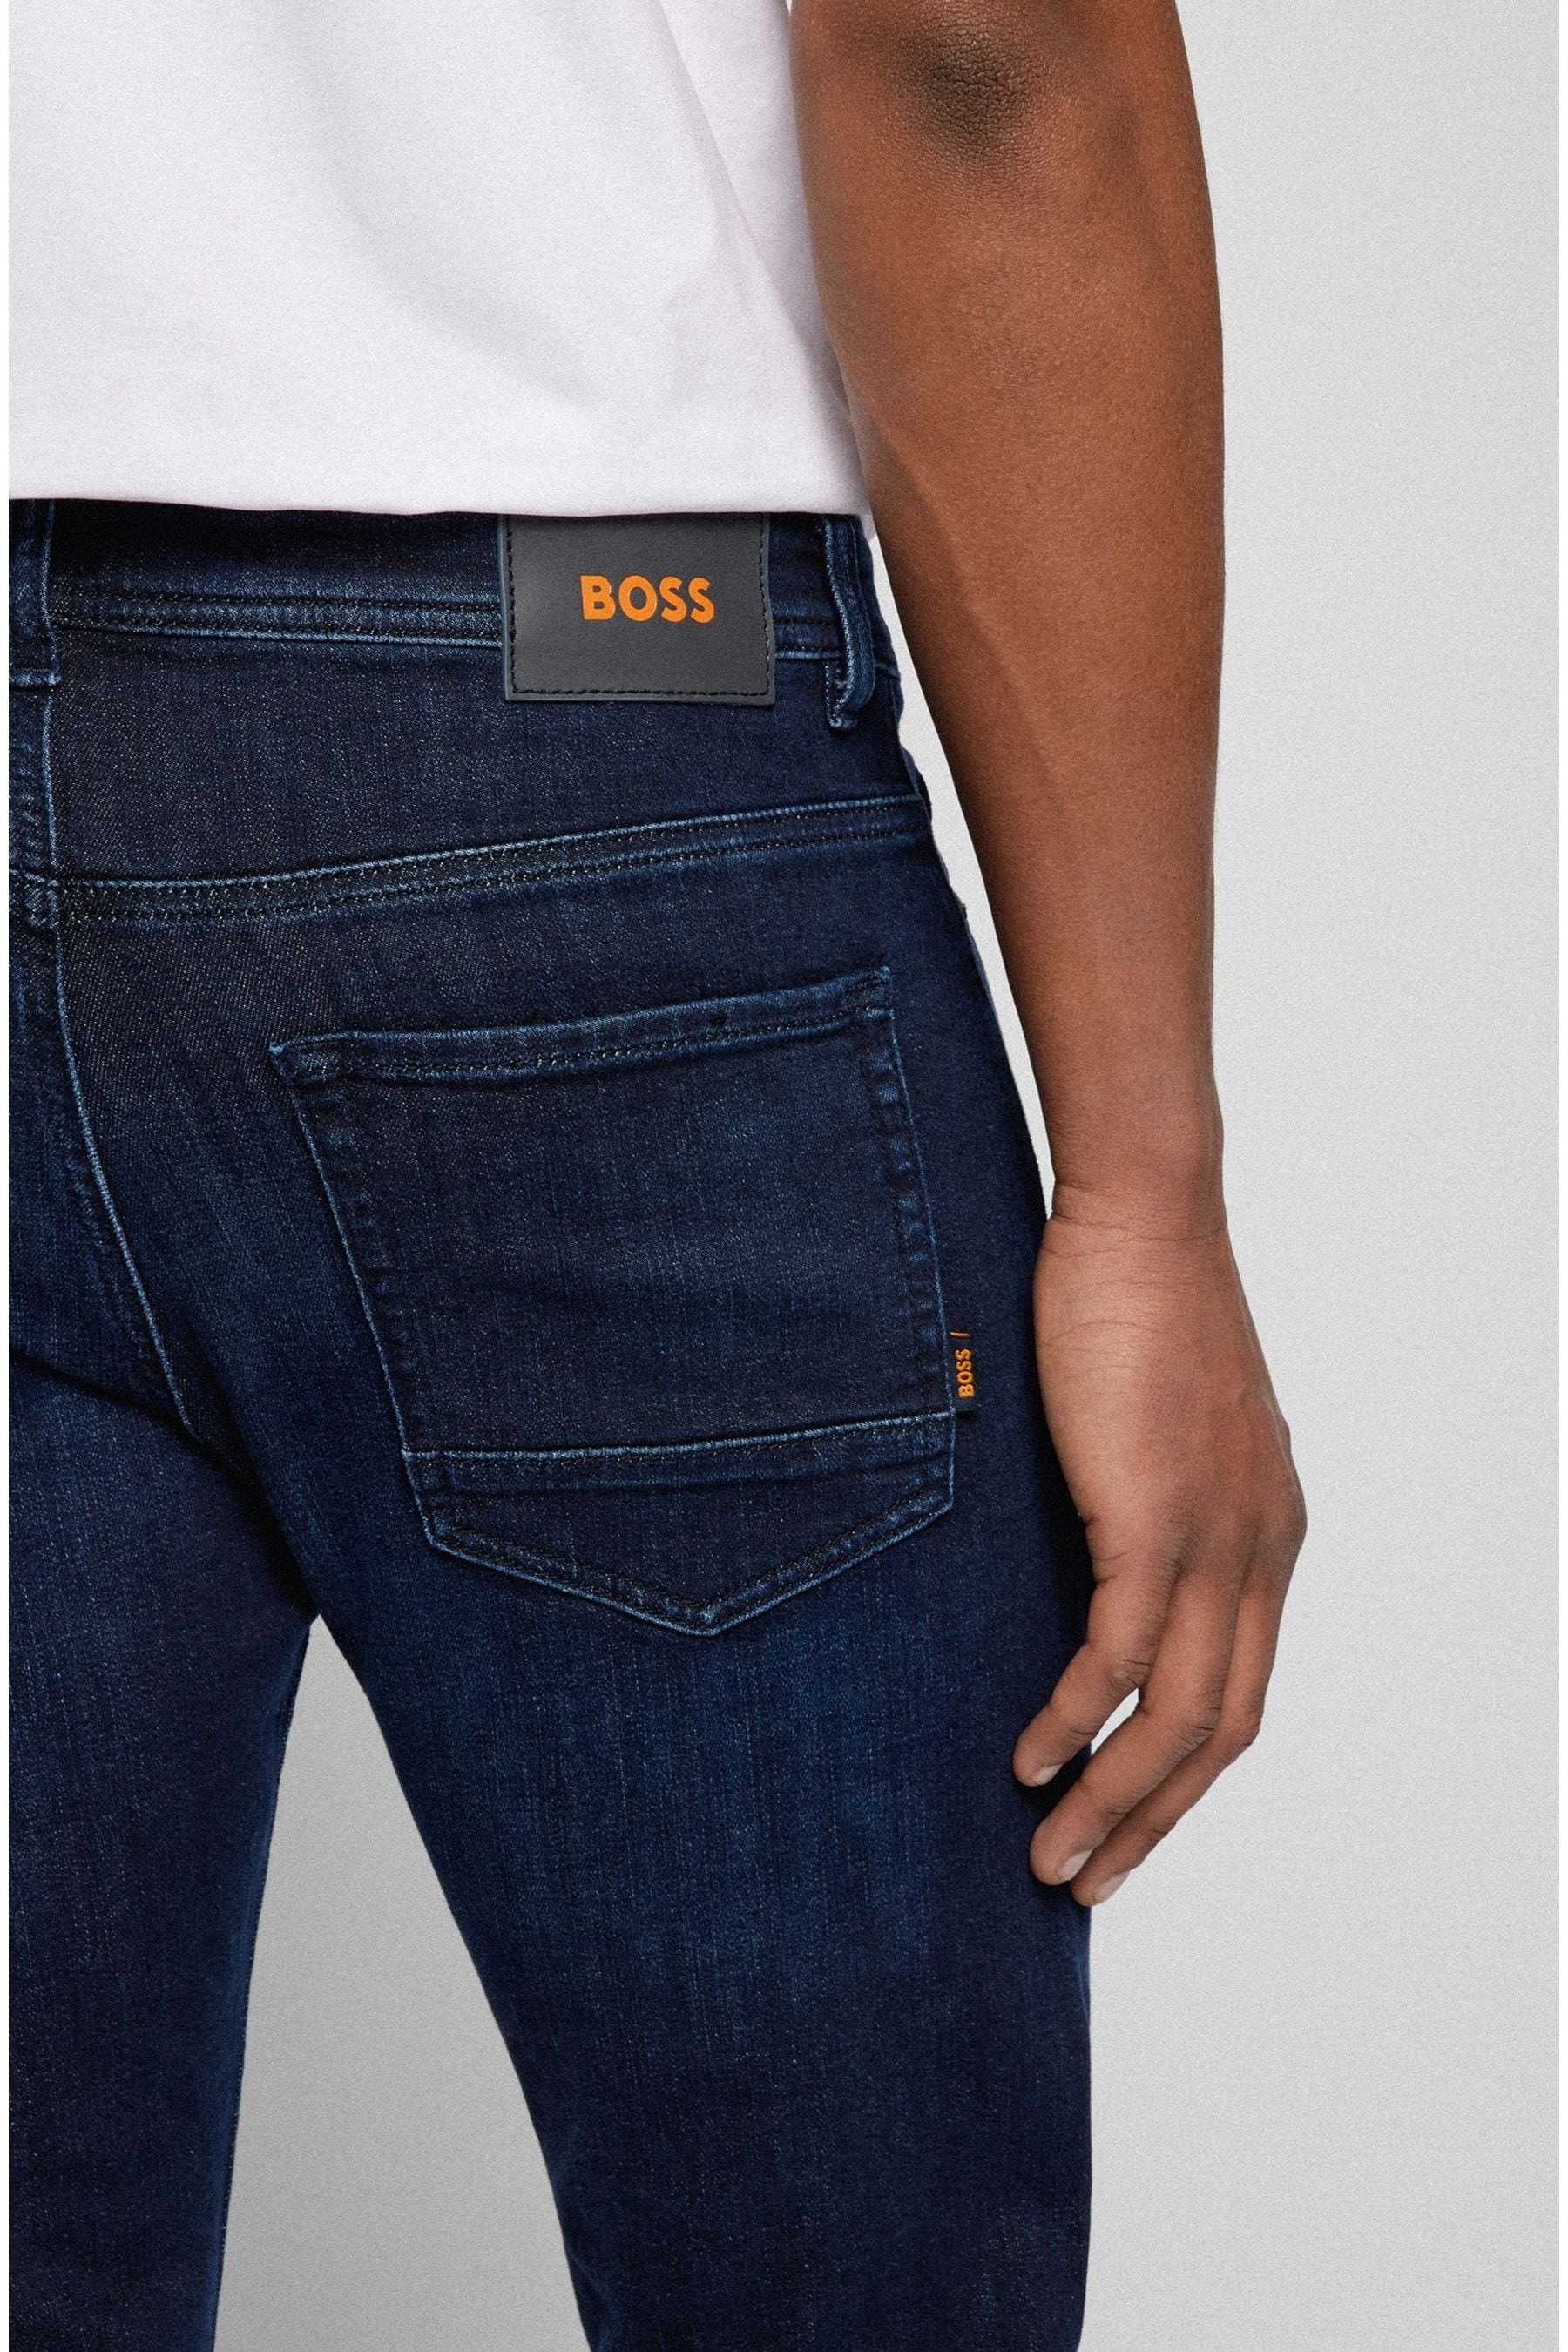 Buy BOSS Taber Taper Fit Stretch Jeans from the Next UK online shop